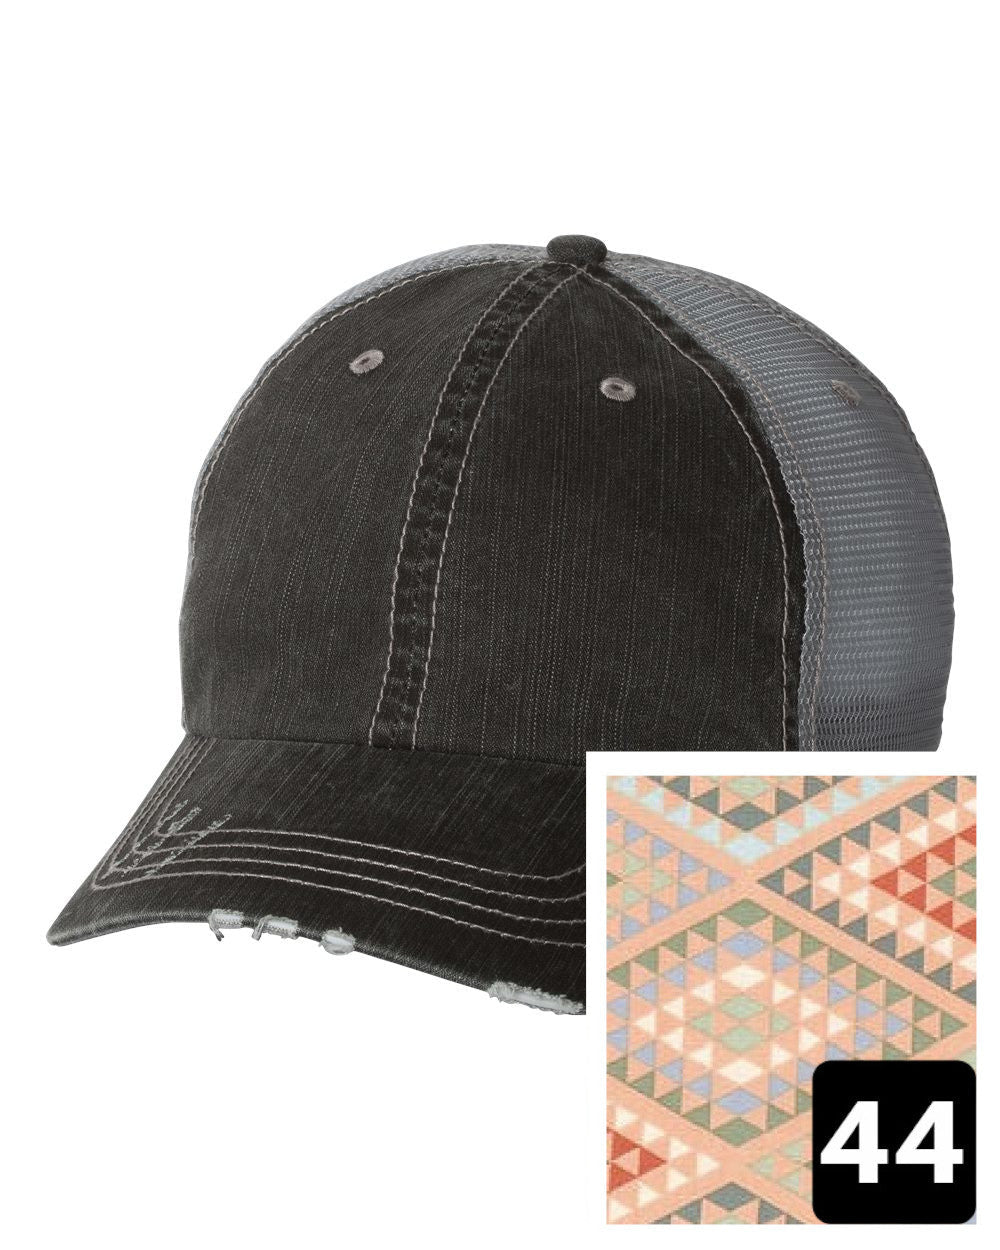 gray distressed trucker hat with navy coral and white chevron fabric state of Pennsylvania